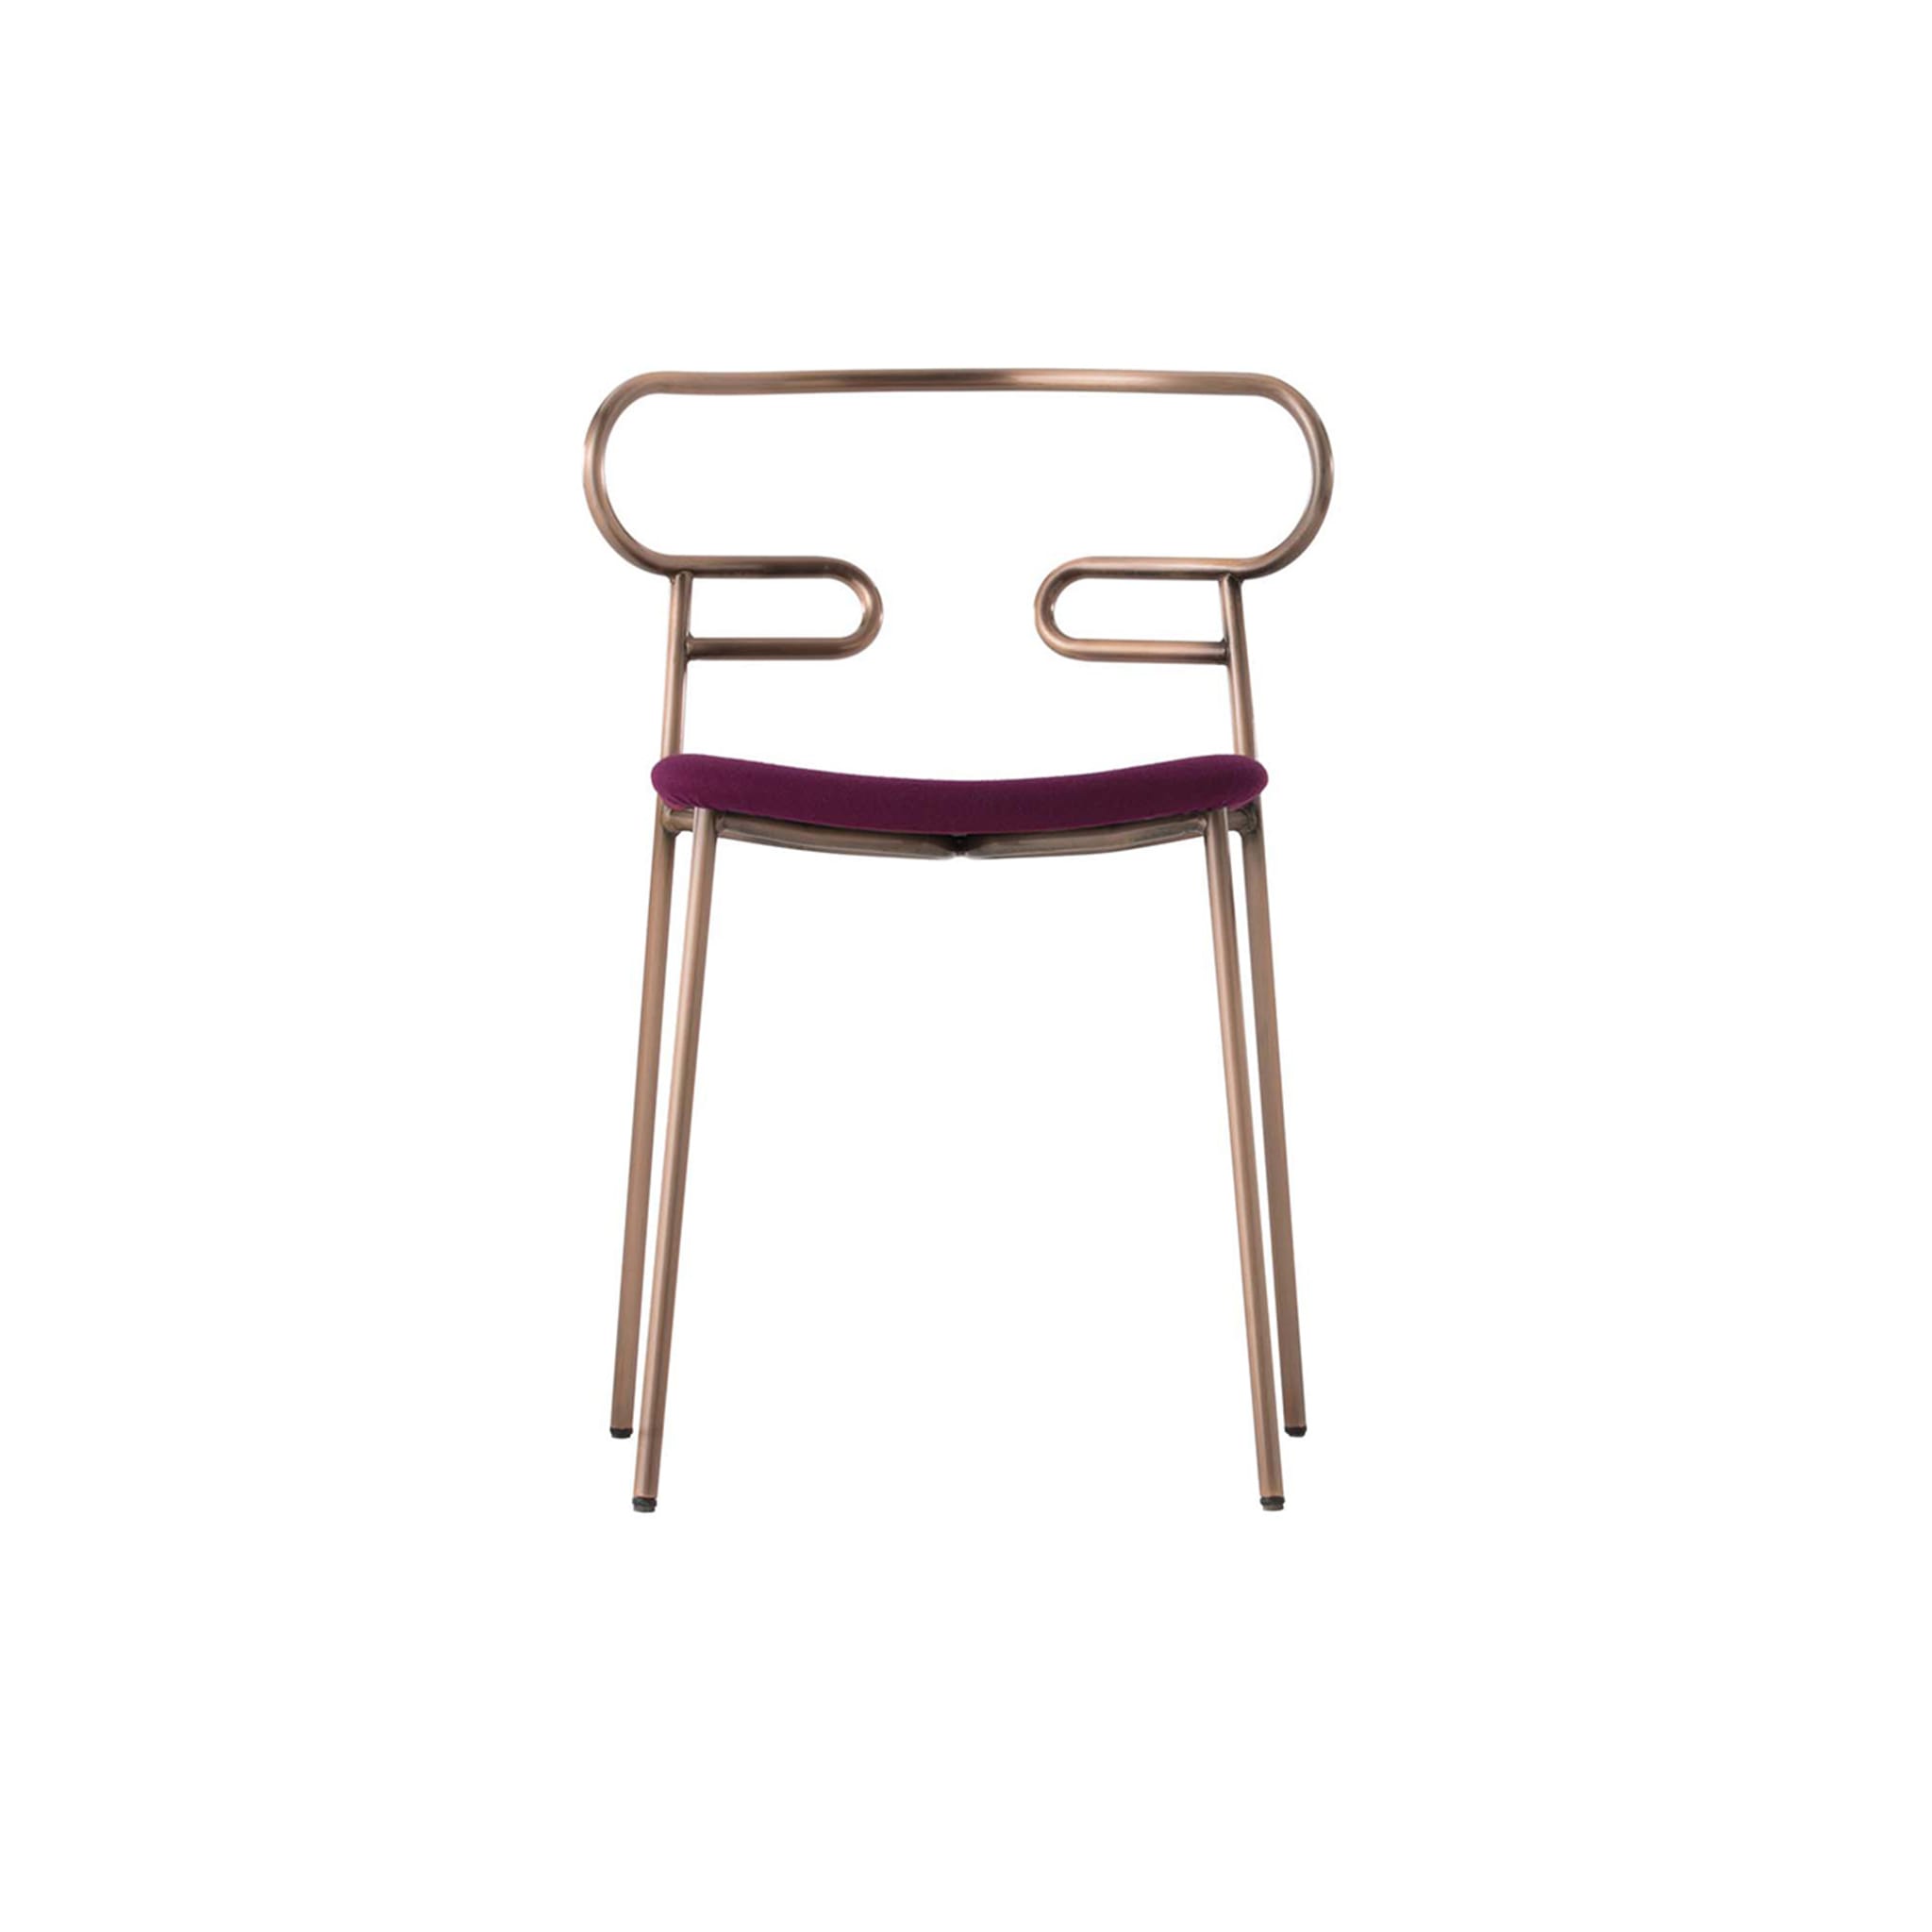 Genoa Purple and Copper Chair by Cesare Ehr - Main view